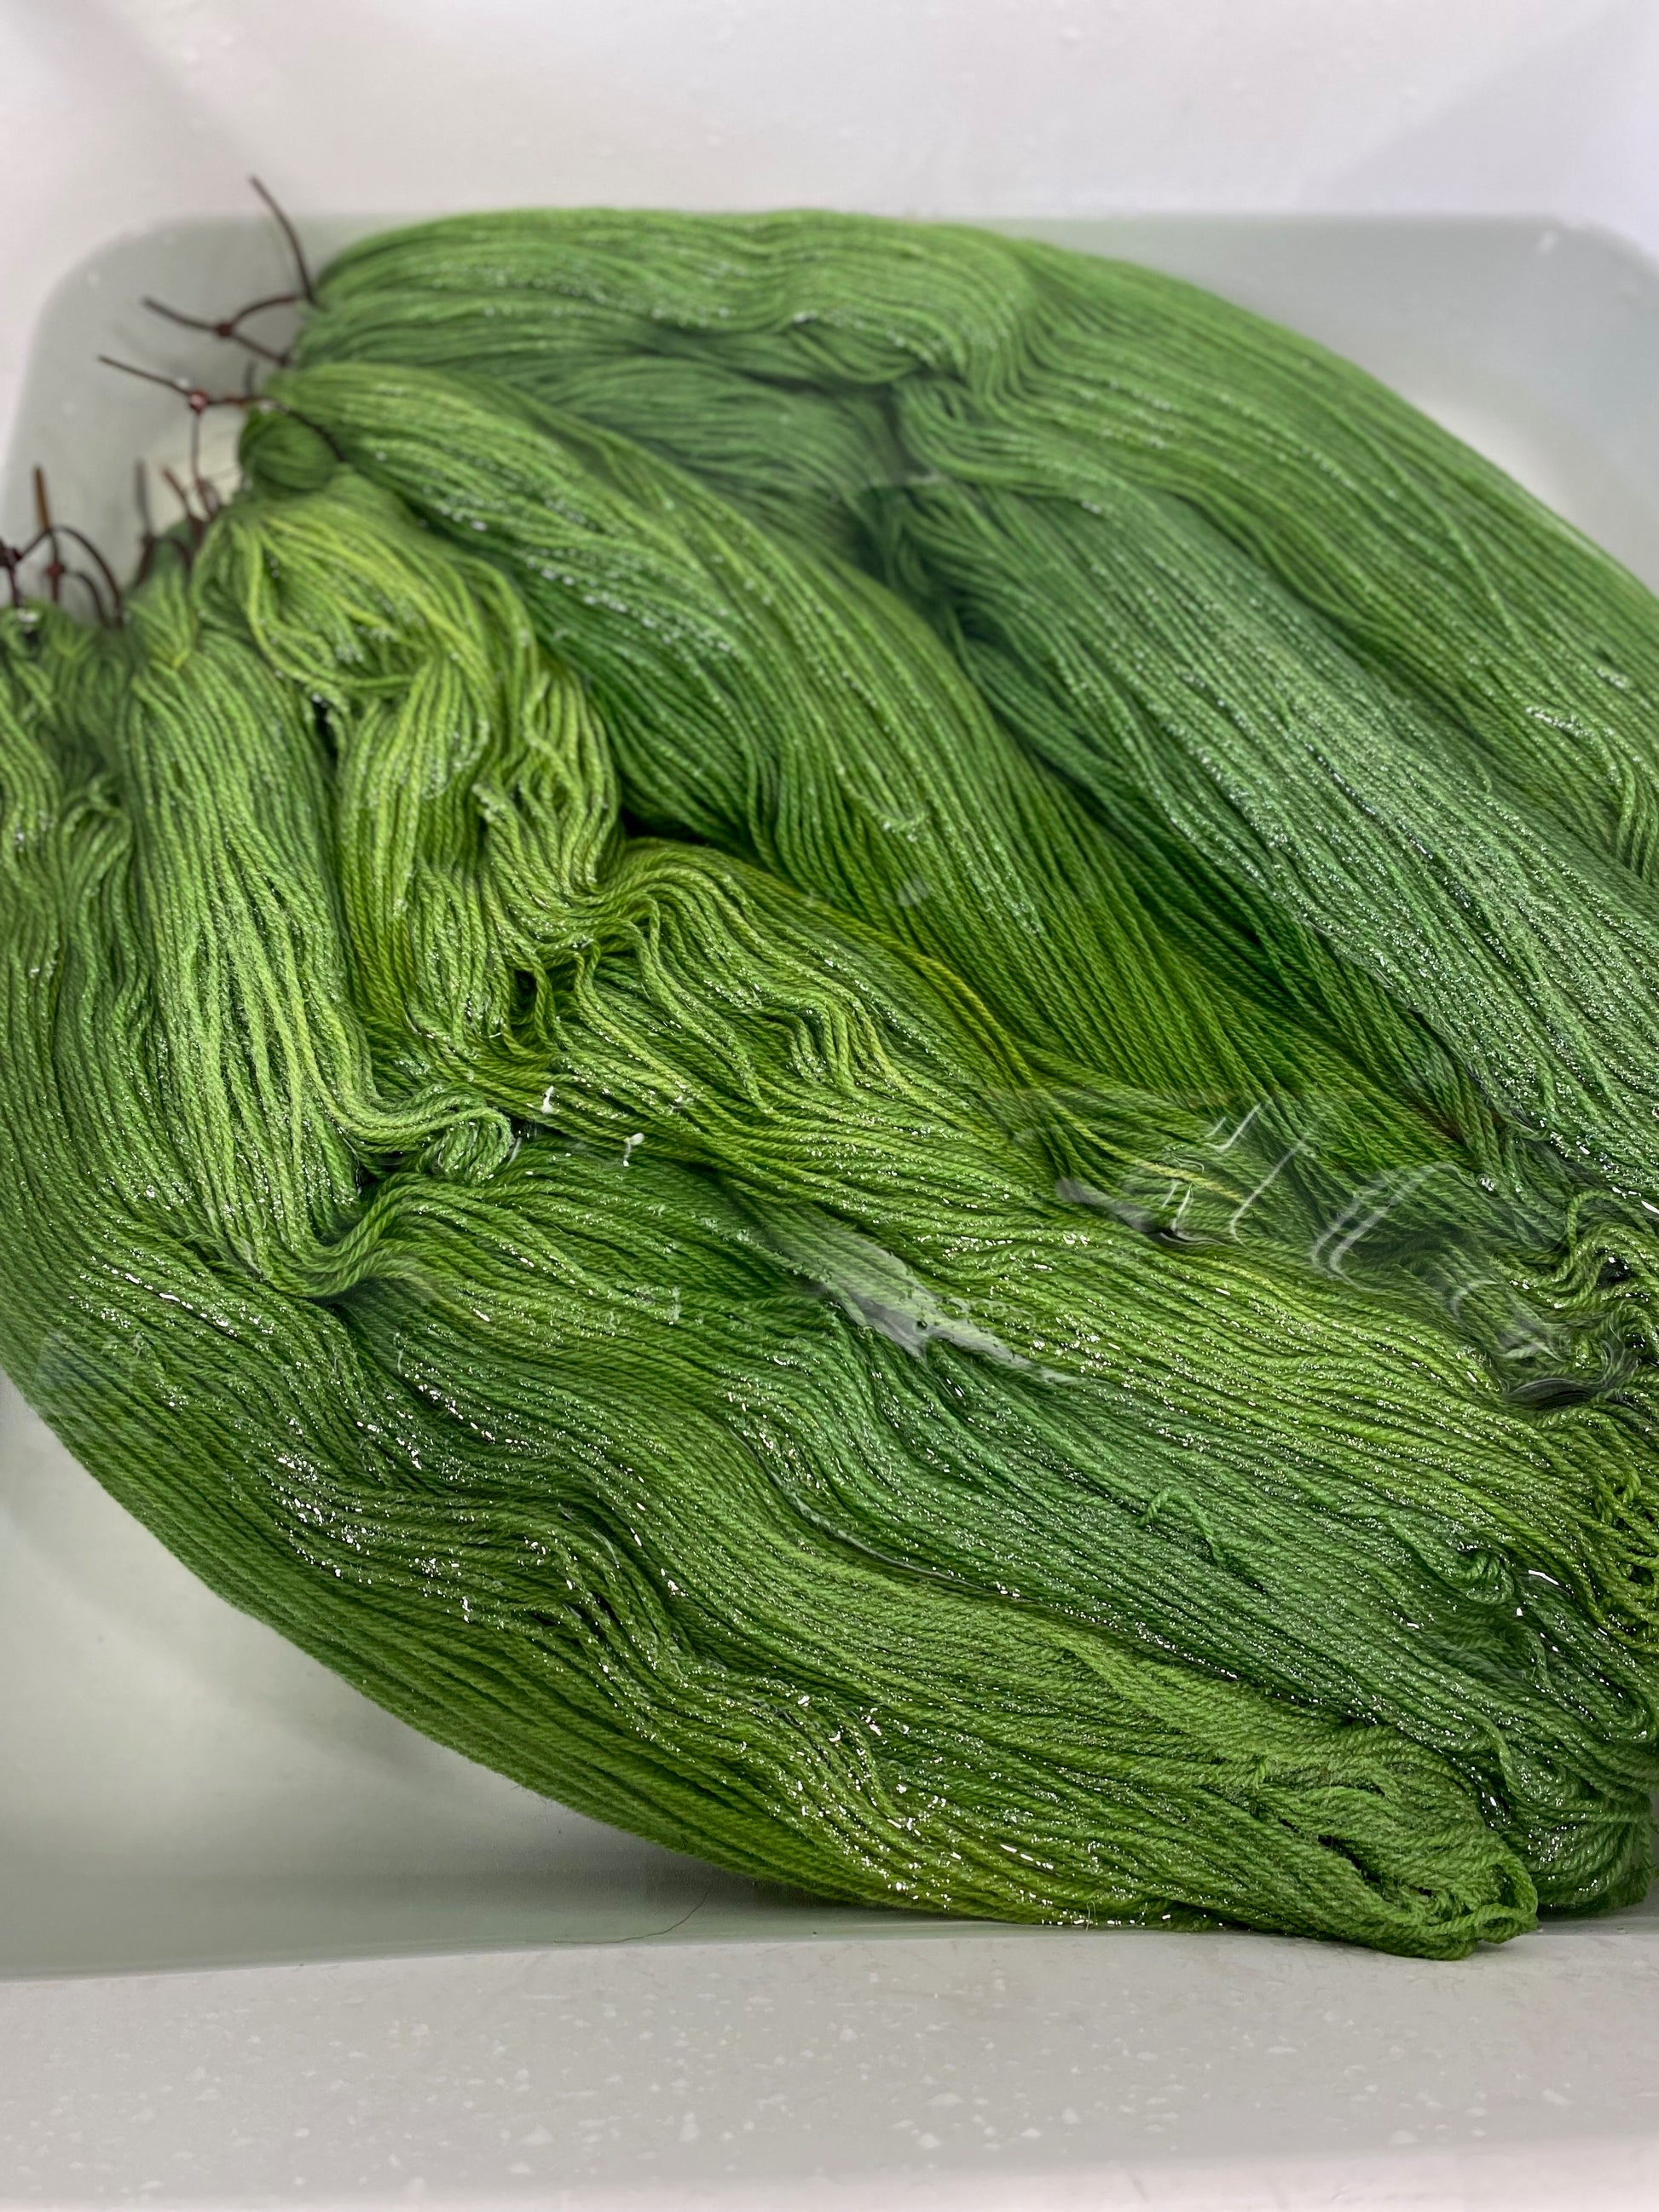 Pasture Green skeins- raised on the farm, dyed with plants rinse in clean water